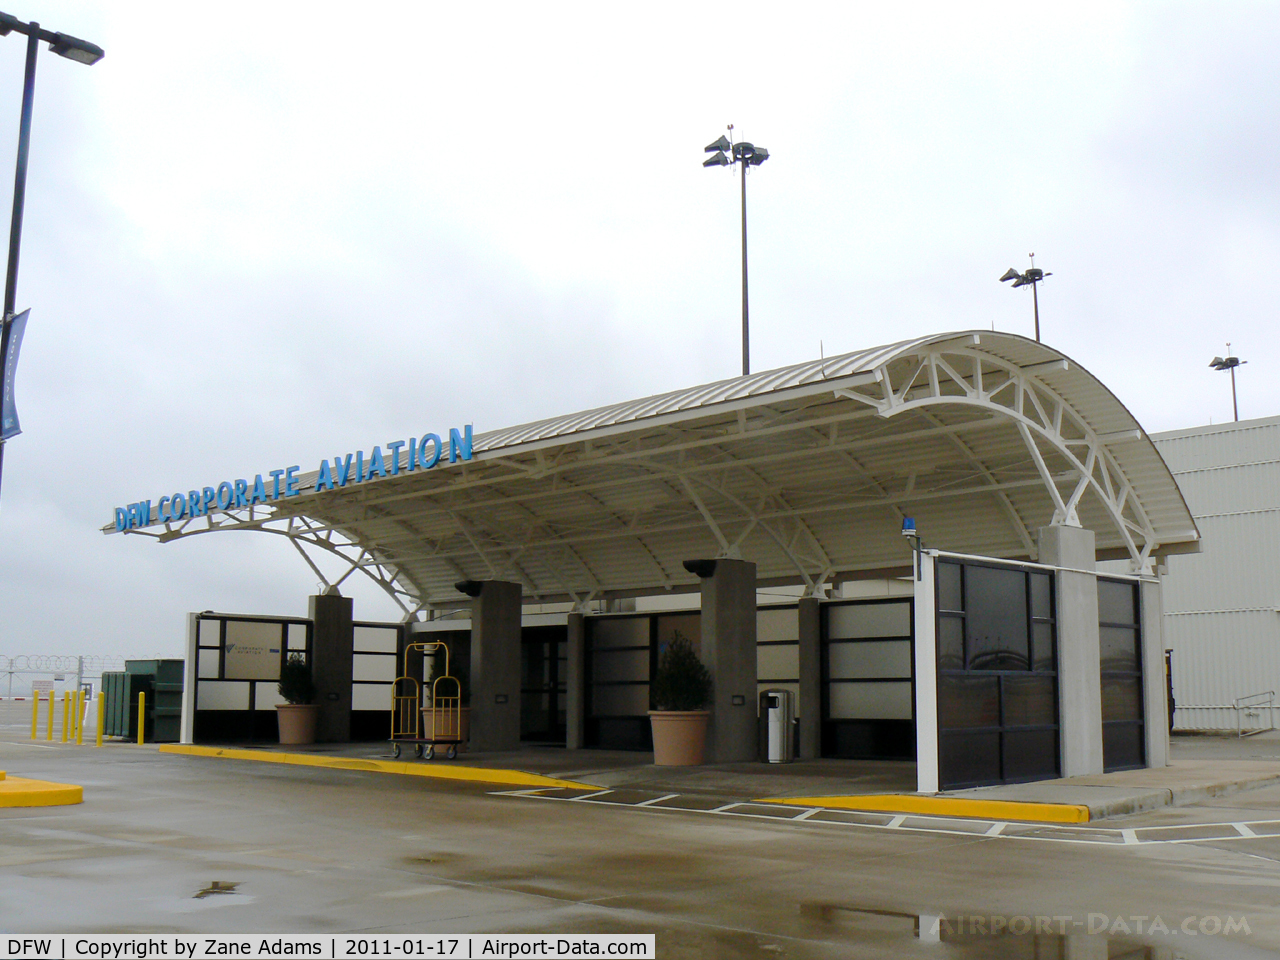 Dallas/fort Worth International Airport (DFW) - New general aviation terminal at DFW Airport